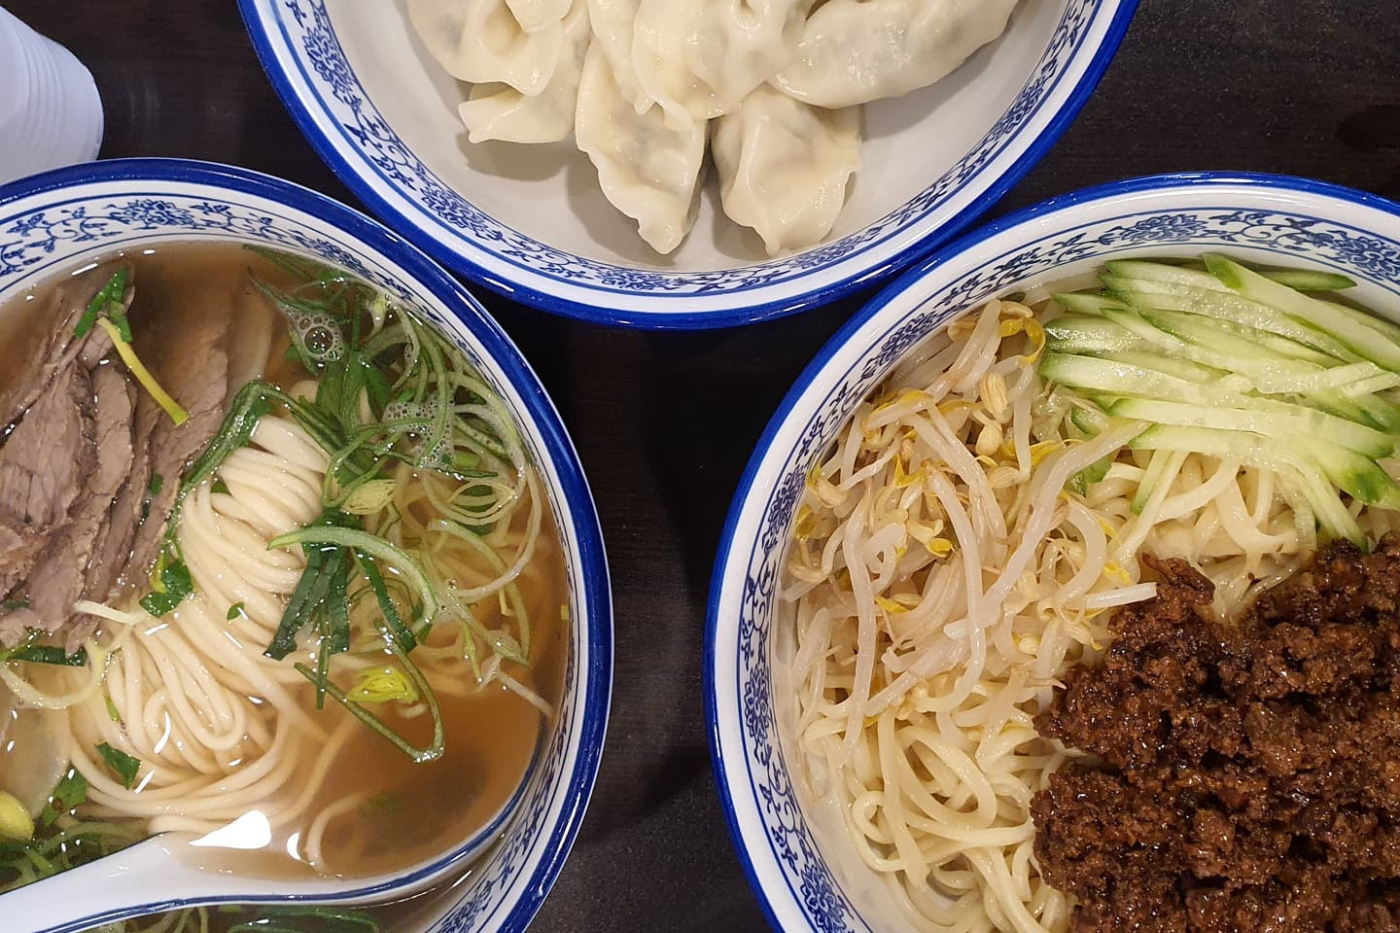 Two noodle dishes and dumplings